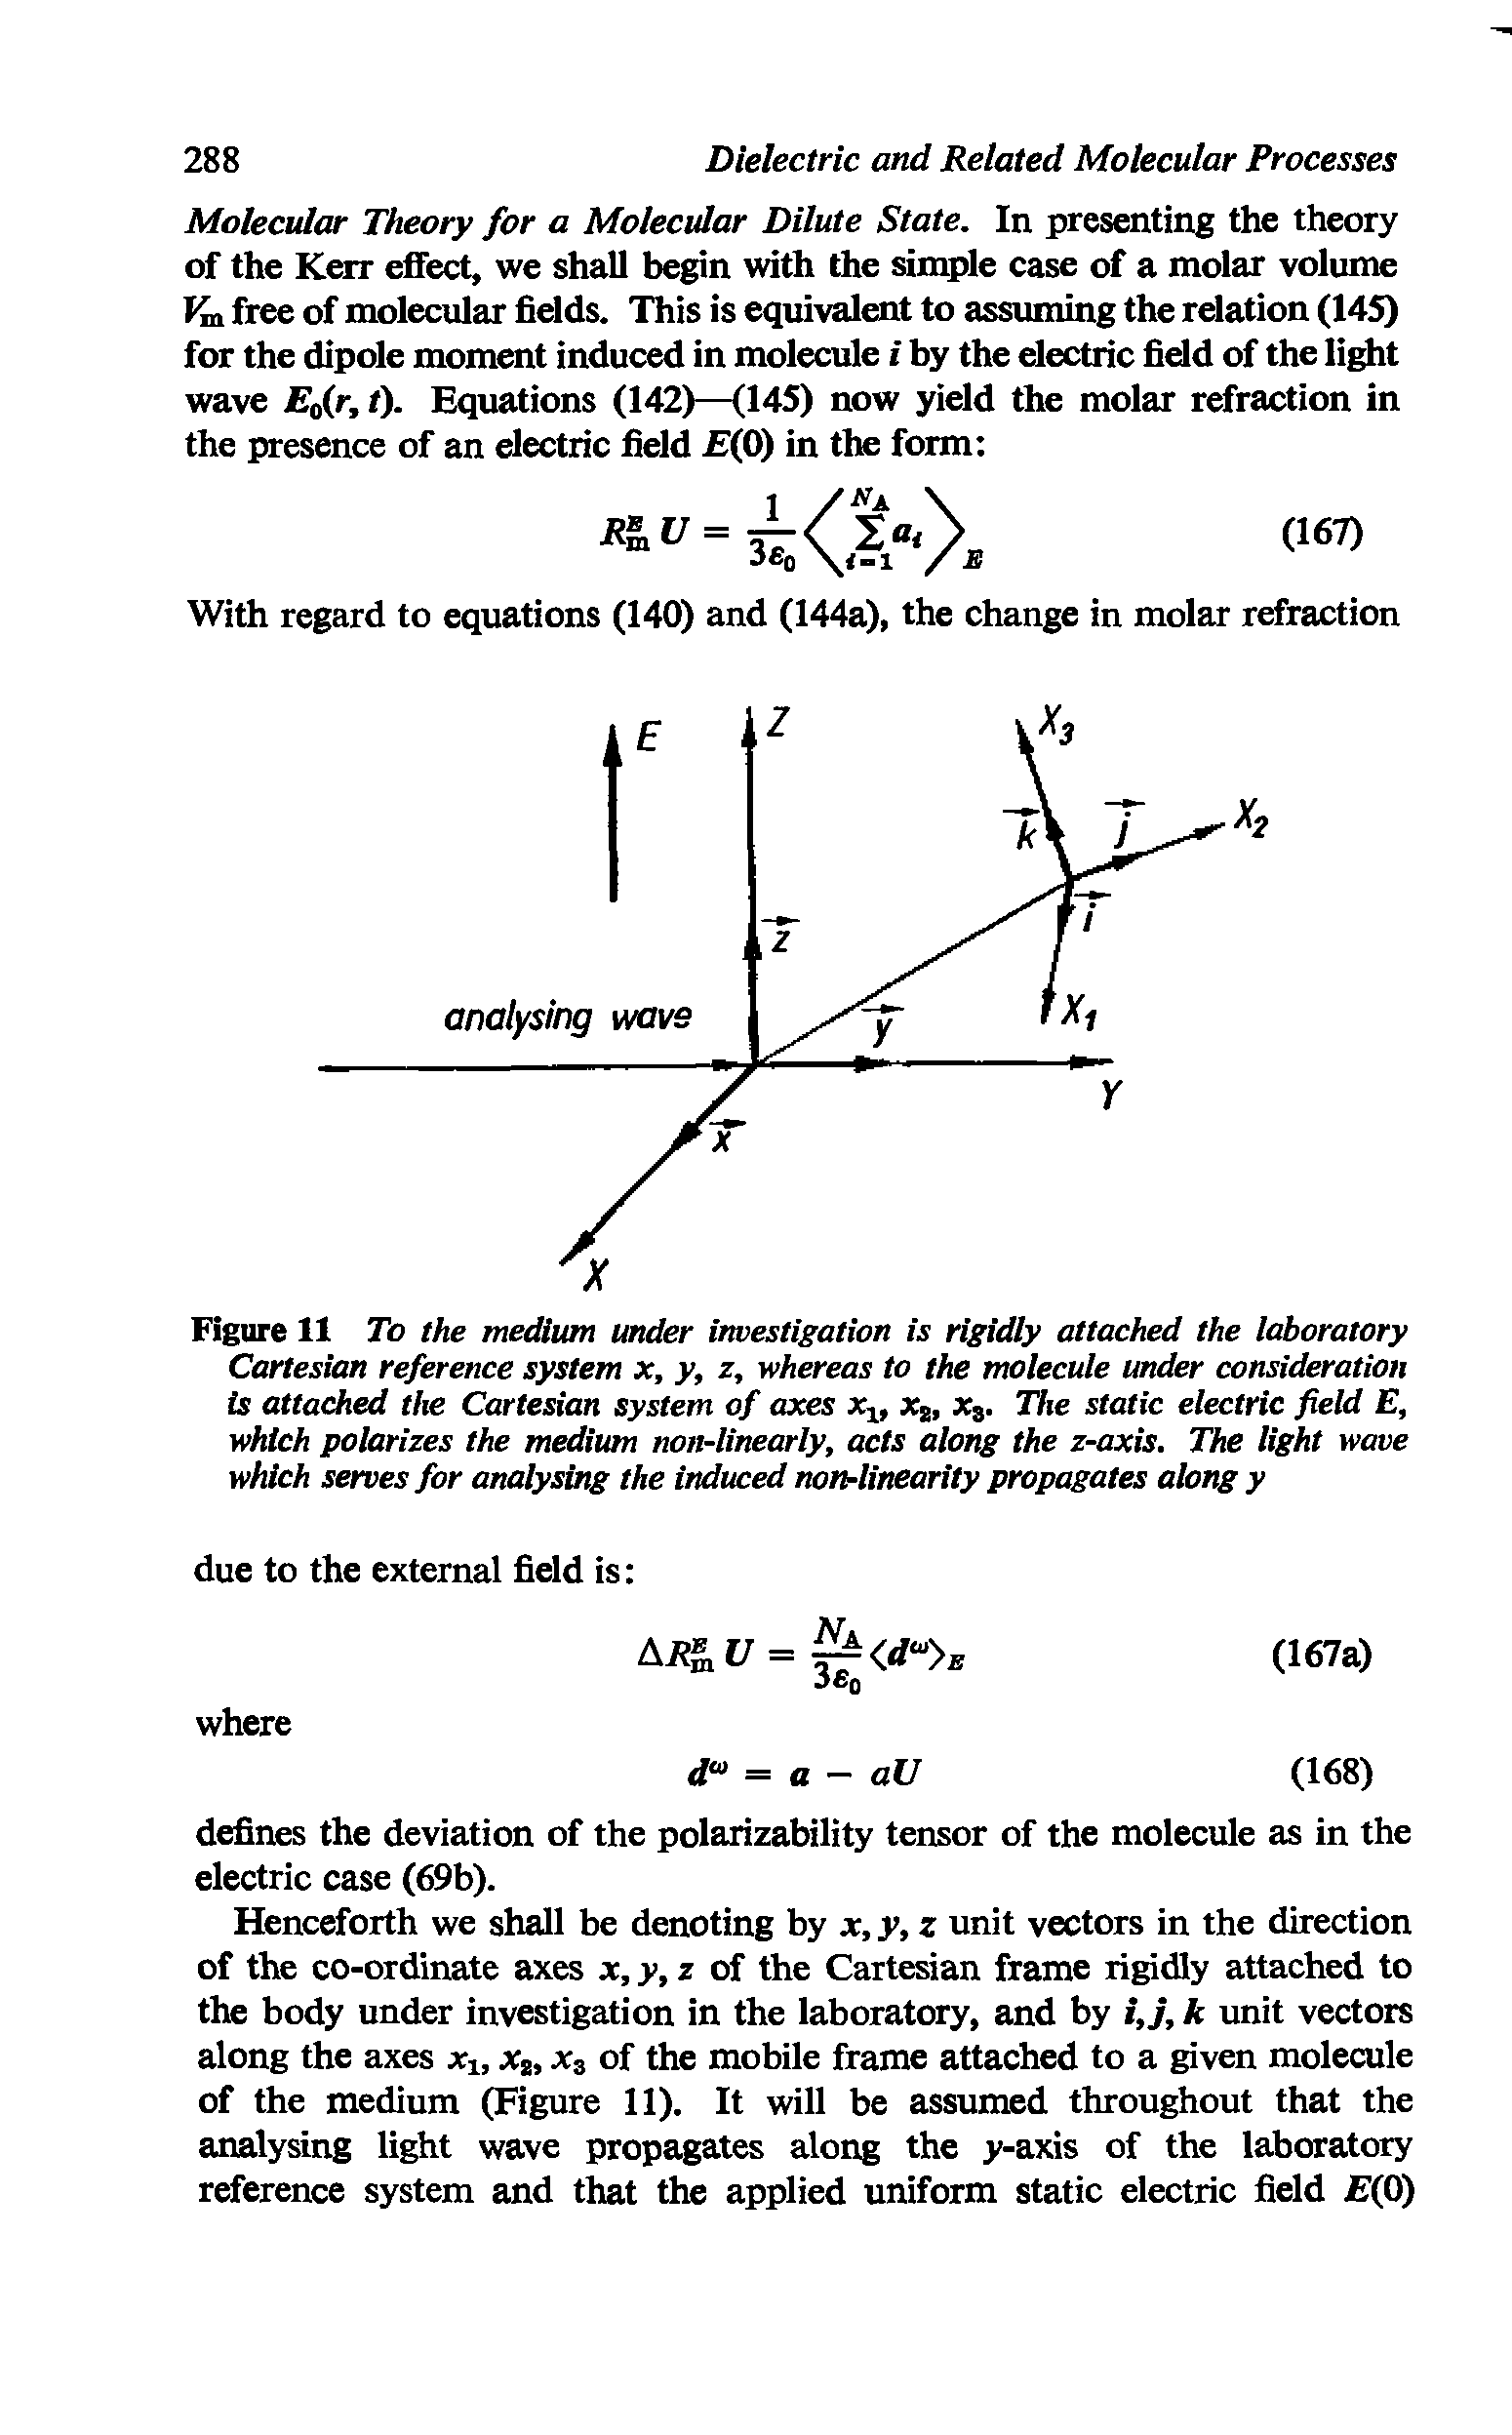 Figure 11 To the medium under investigation is rigidly attached the laboratory Cartesian reference system x, y, z, whereas to the molecule under consideration is attached the Cartesian system of axes x, Xj, Xj. The static electric field E, which polarizes the medium non-linearly, acts along the z-axis. The light wave which serves for analysing the induced non-linearity propagates along y...